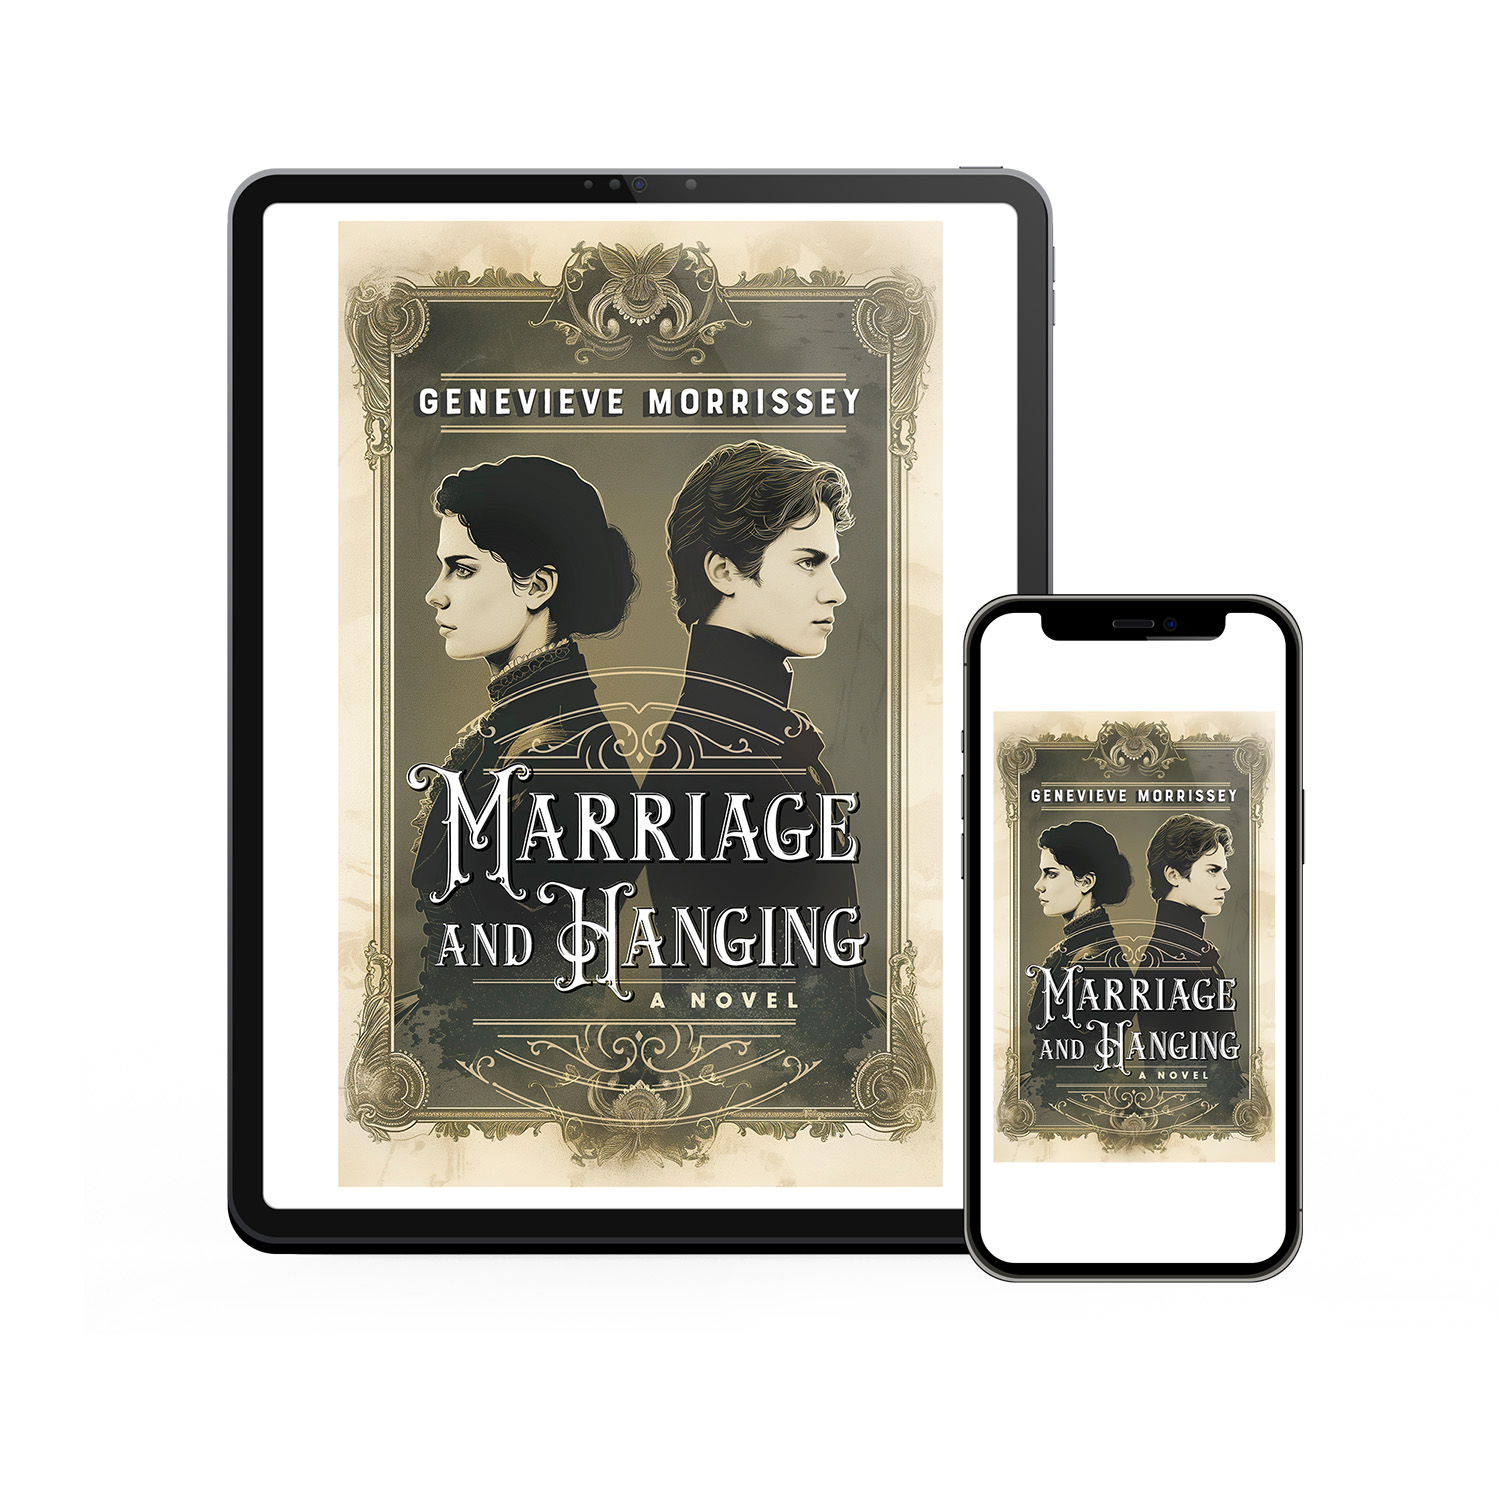 'Marriage and Hanging' is an intriguing murder mystery novel set in early 19th century America. The author is Genevieve Morrissey. The cover design and interior formatting are by Mark Thomas of coverness.com. To find out more about my book design services, please visit www.coverness.com.